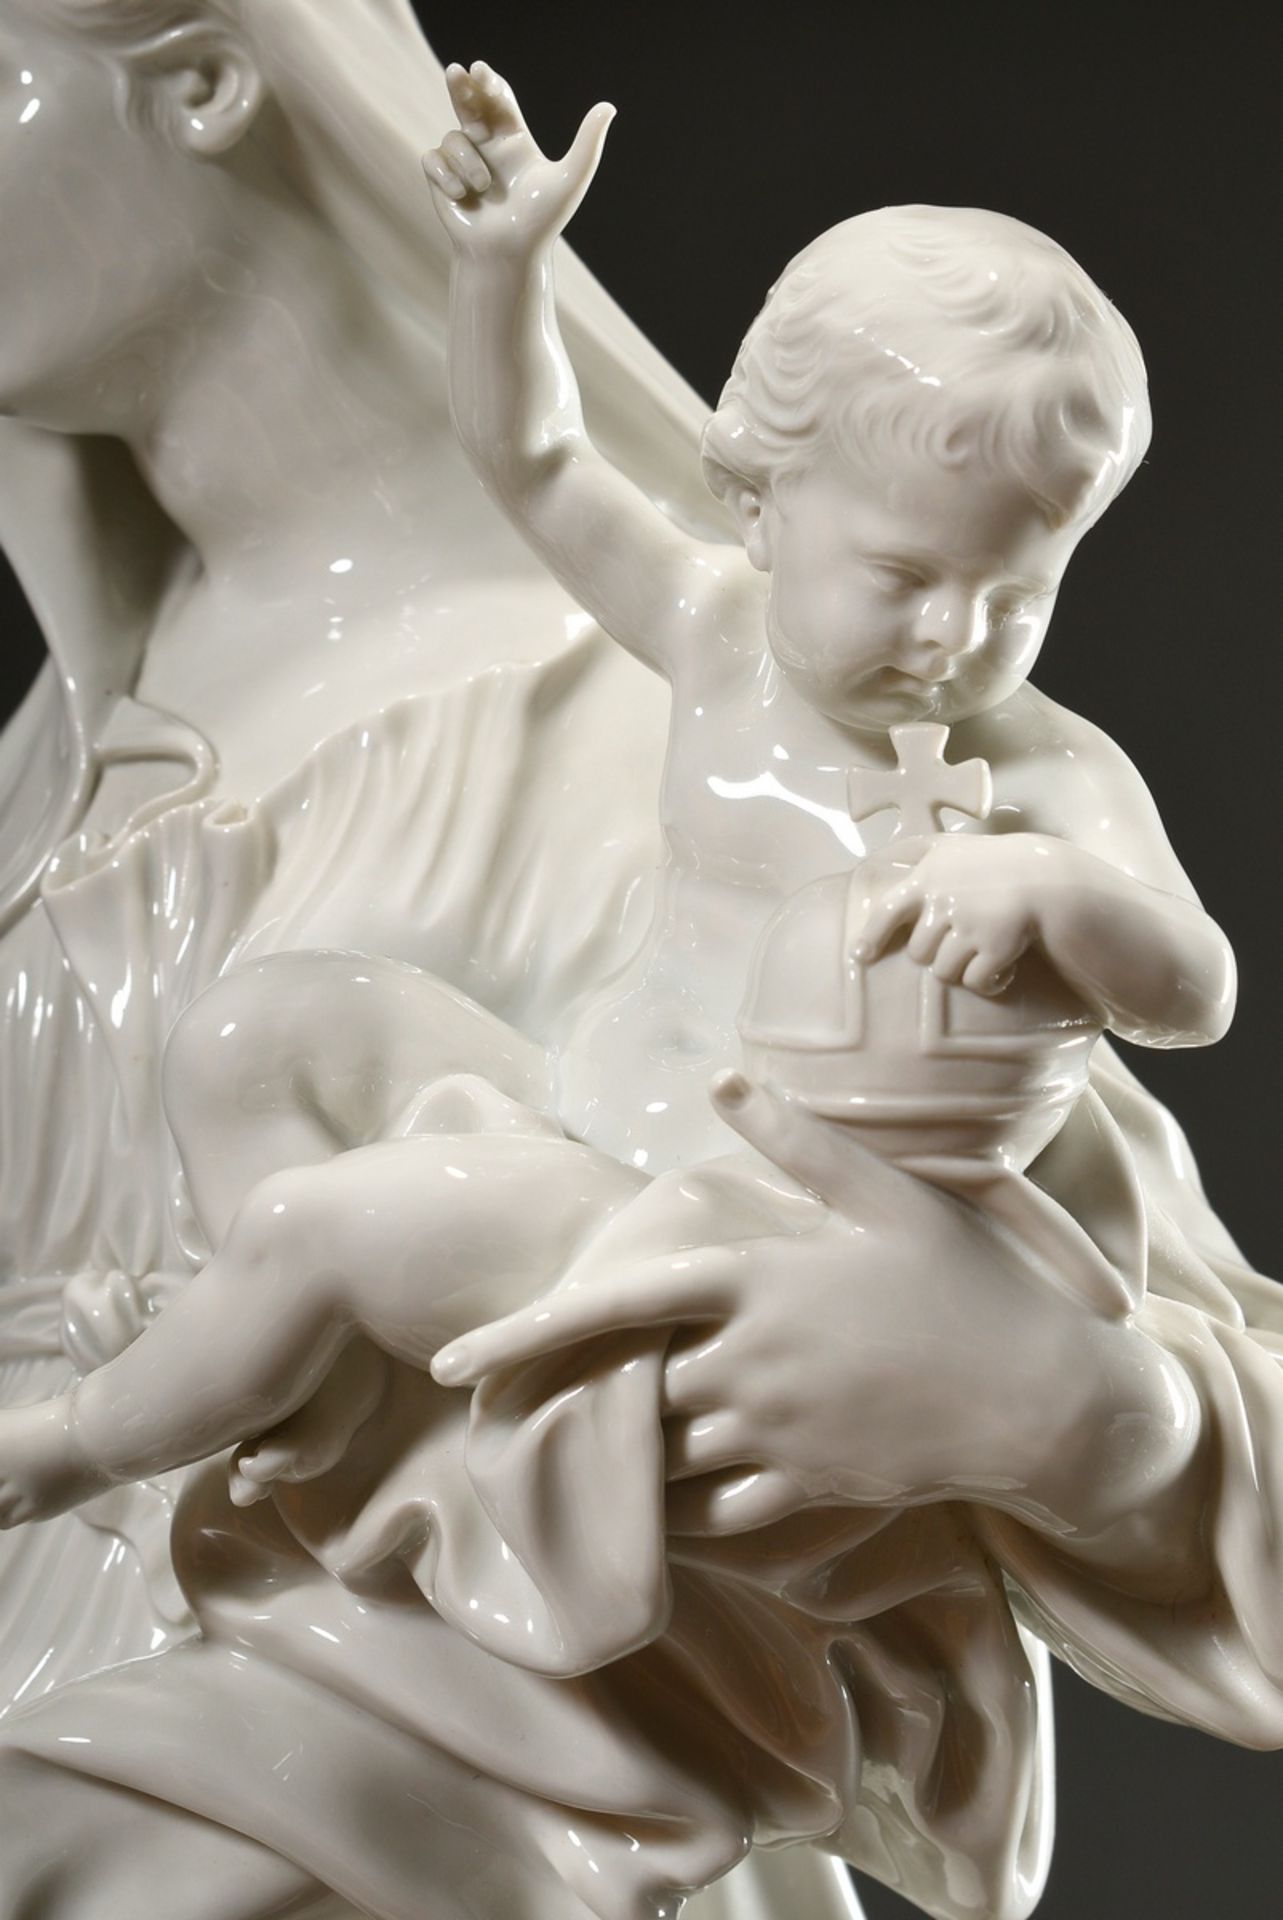 Large Meissen white porcelain figure "Madonna with the Child on the Globe", designed by Johann Gott - Image 11 of 11